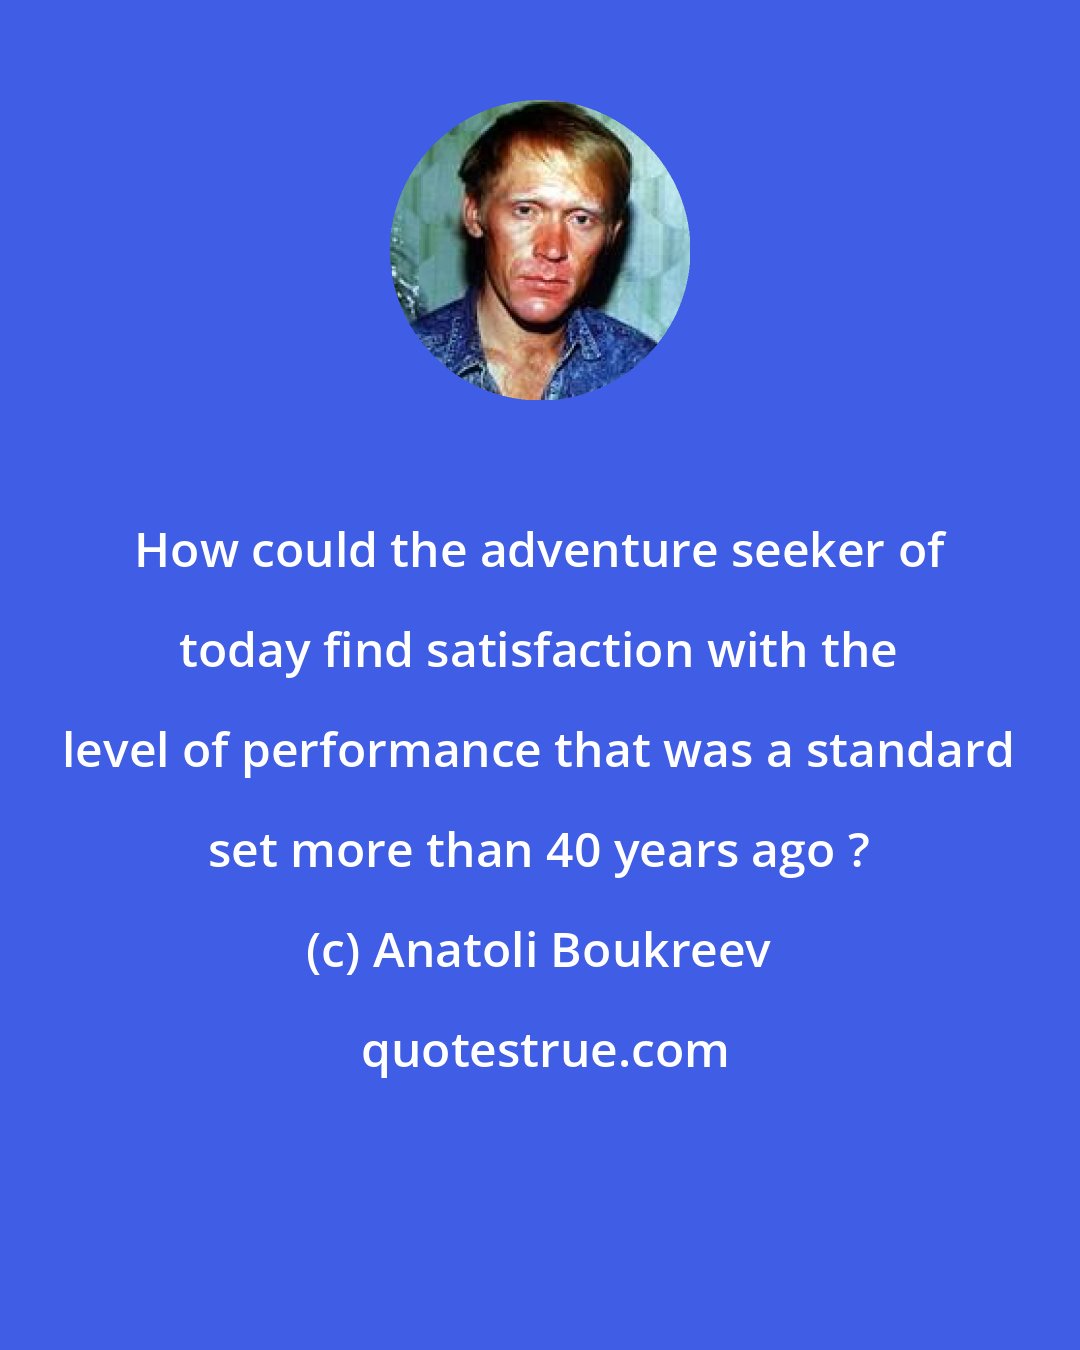 Anatoli Boukreev: How could the adventure seeker of today find satisfaction with the level of performance that was a standard set more than 40 years ago ?